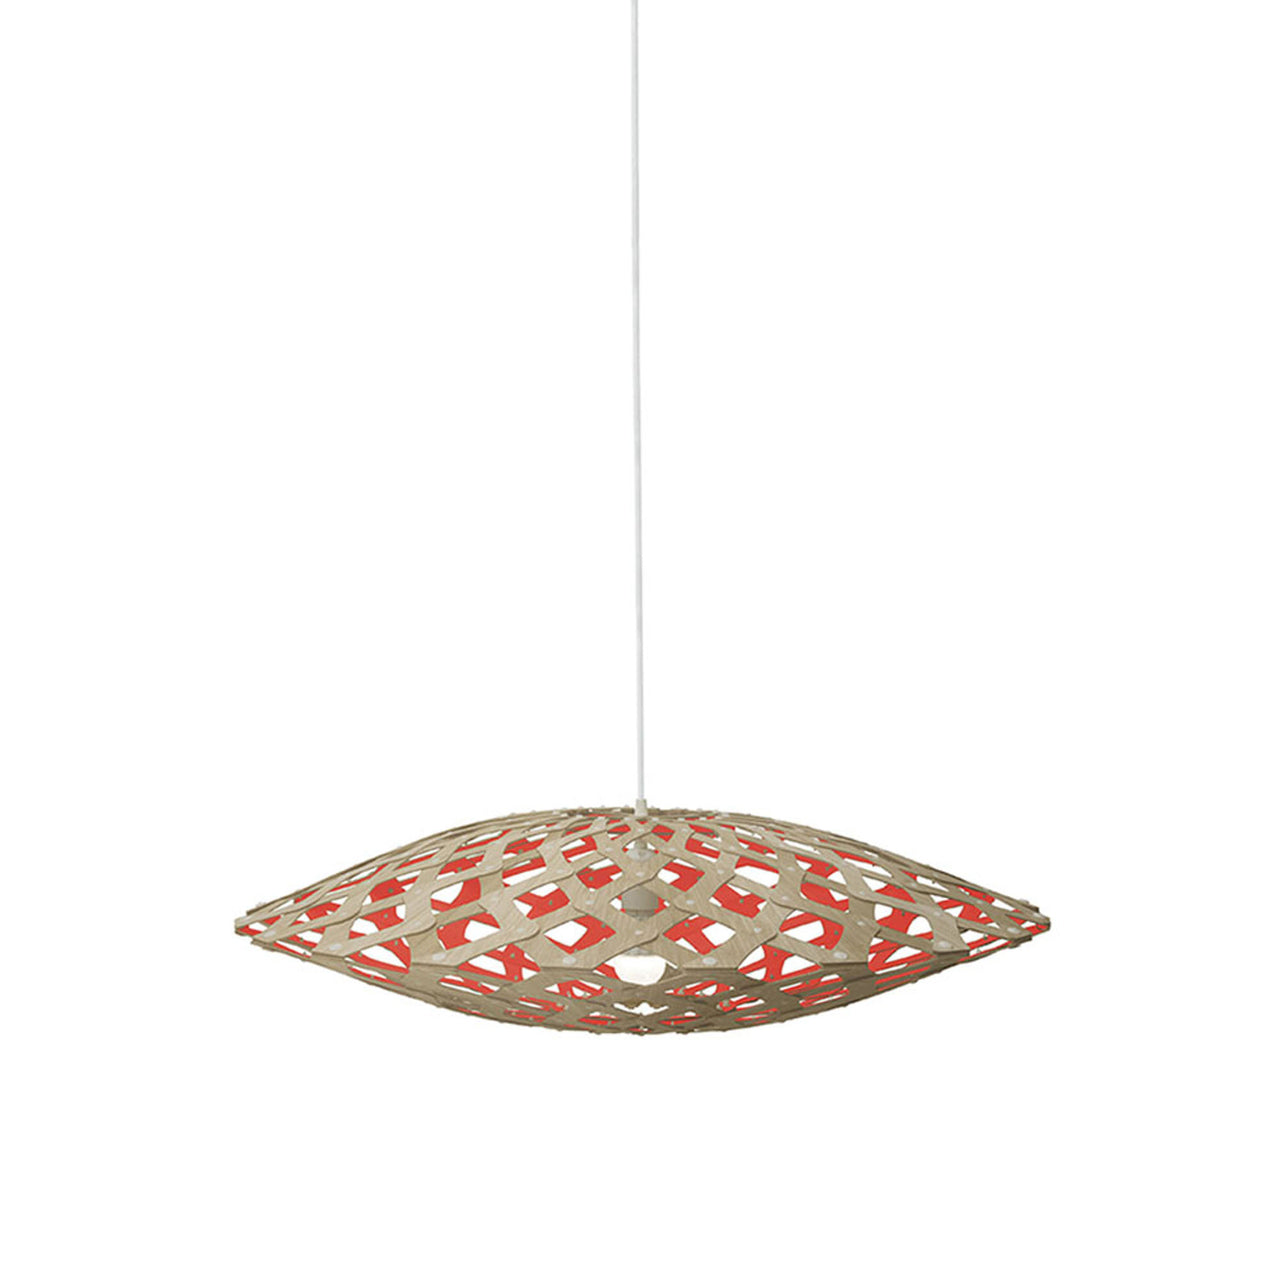 Flax Pendant Light: Small + Bamboo + Red + White